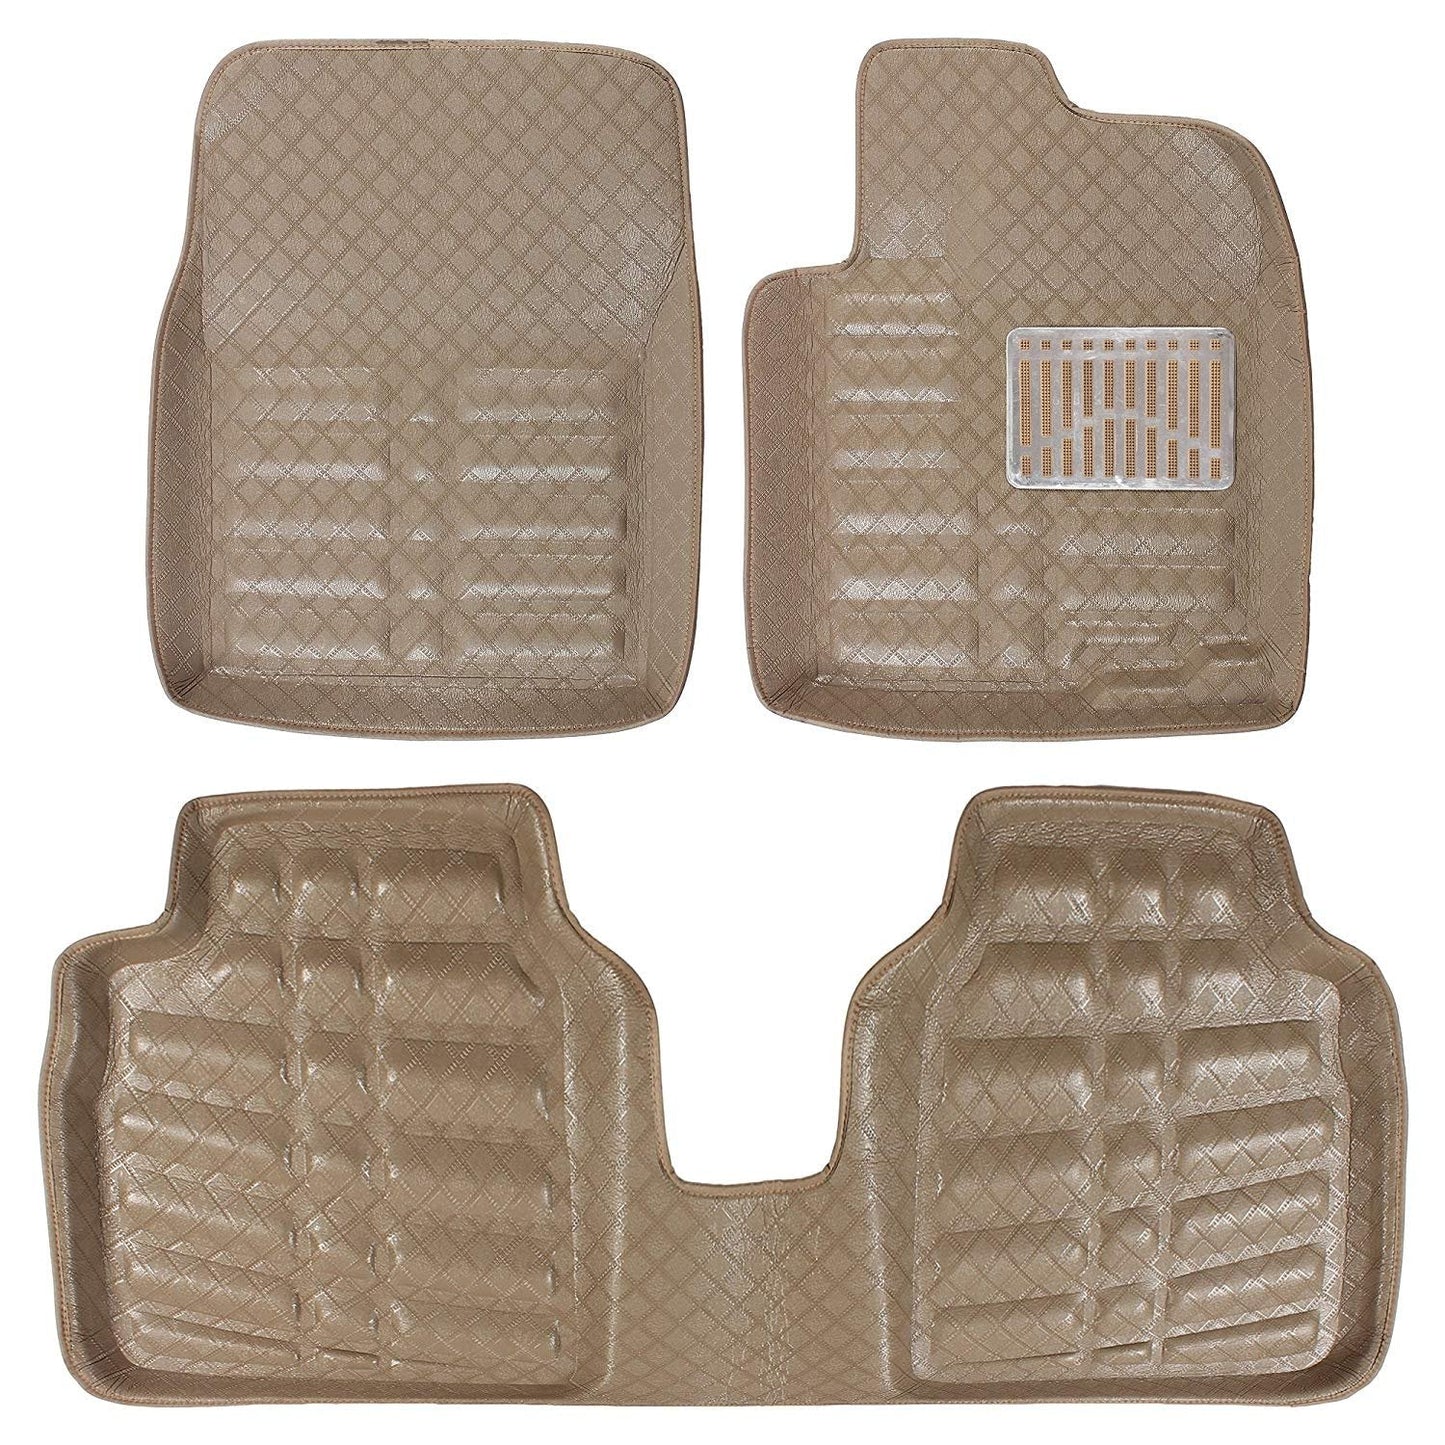 Oshotto 4D Artificial Leather Car Floor Mats For Renault Duster (2 Pieces Front and one Long Single Rear PC) -Set of 3 - Beige